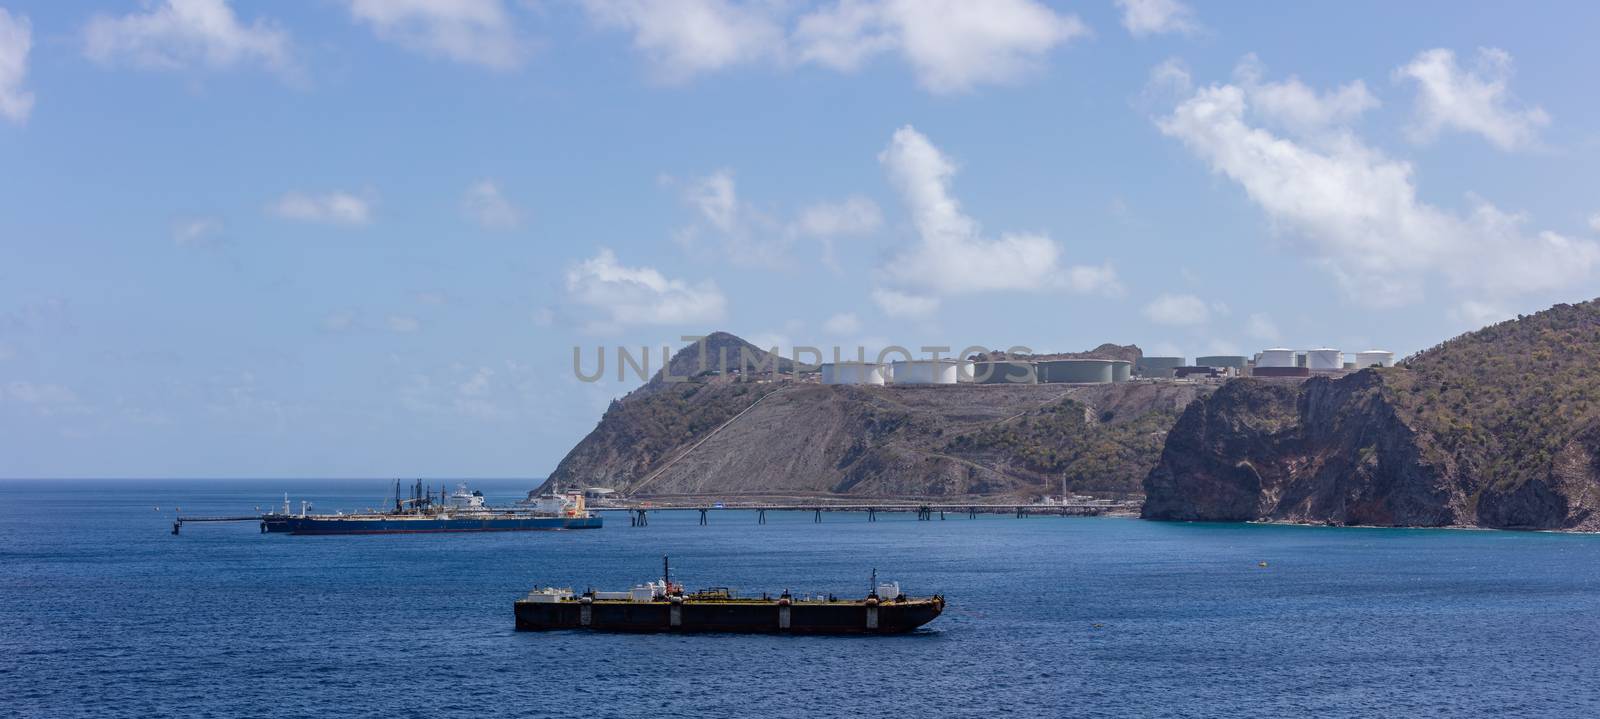 St. Eustatius island. Panorama of huge fuel tanks up on the hills and fueling barges in the front.